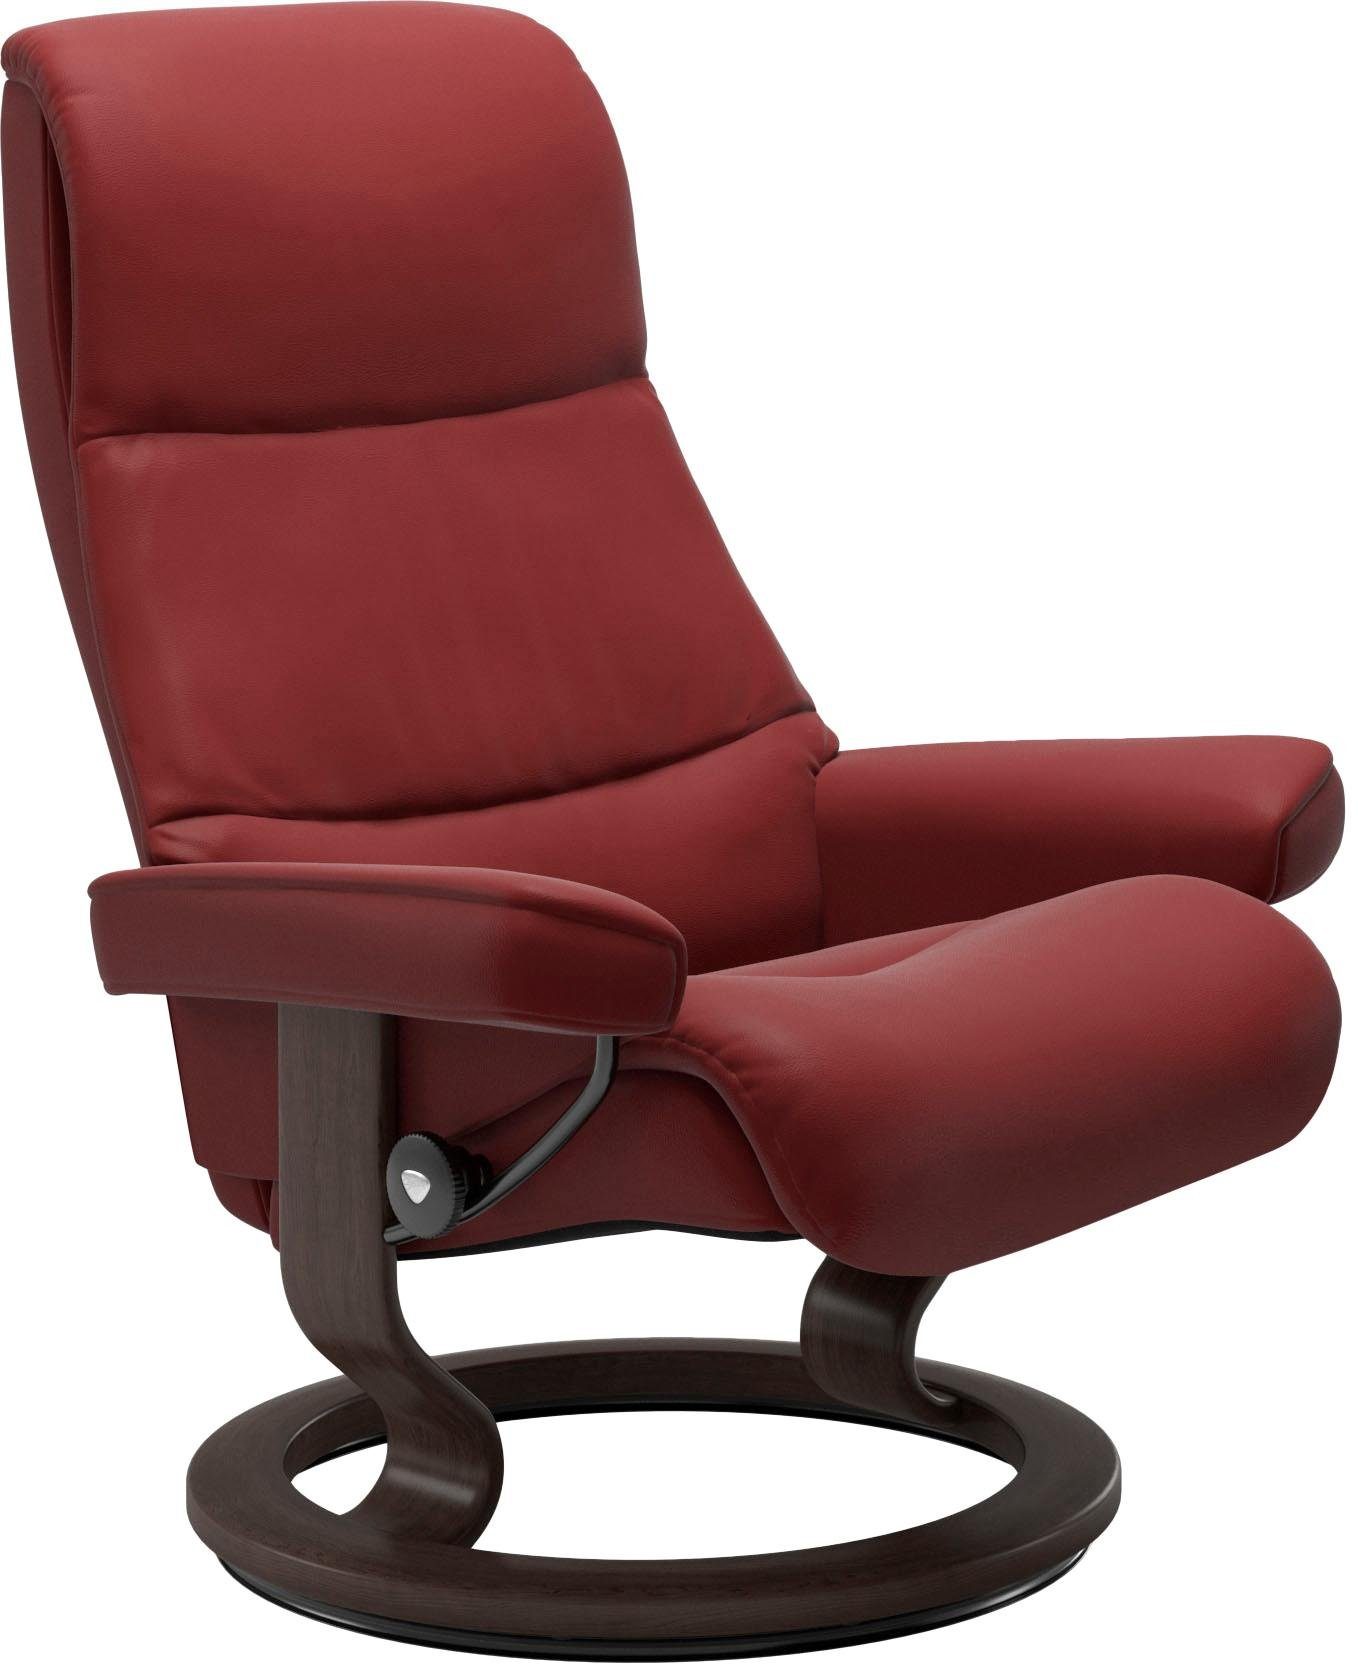 mit Relaxsessel View, Stressless® Classic Größe M,Gestell Base, Wenge